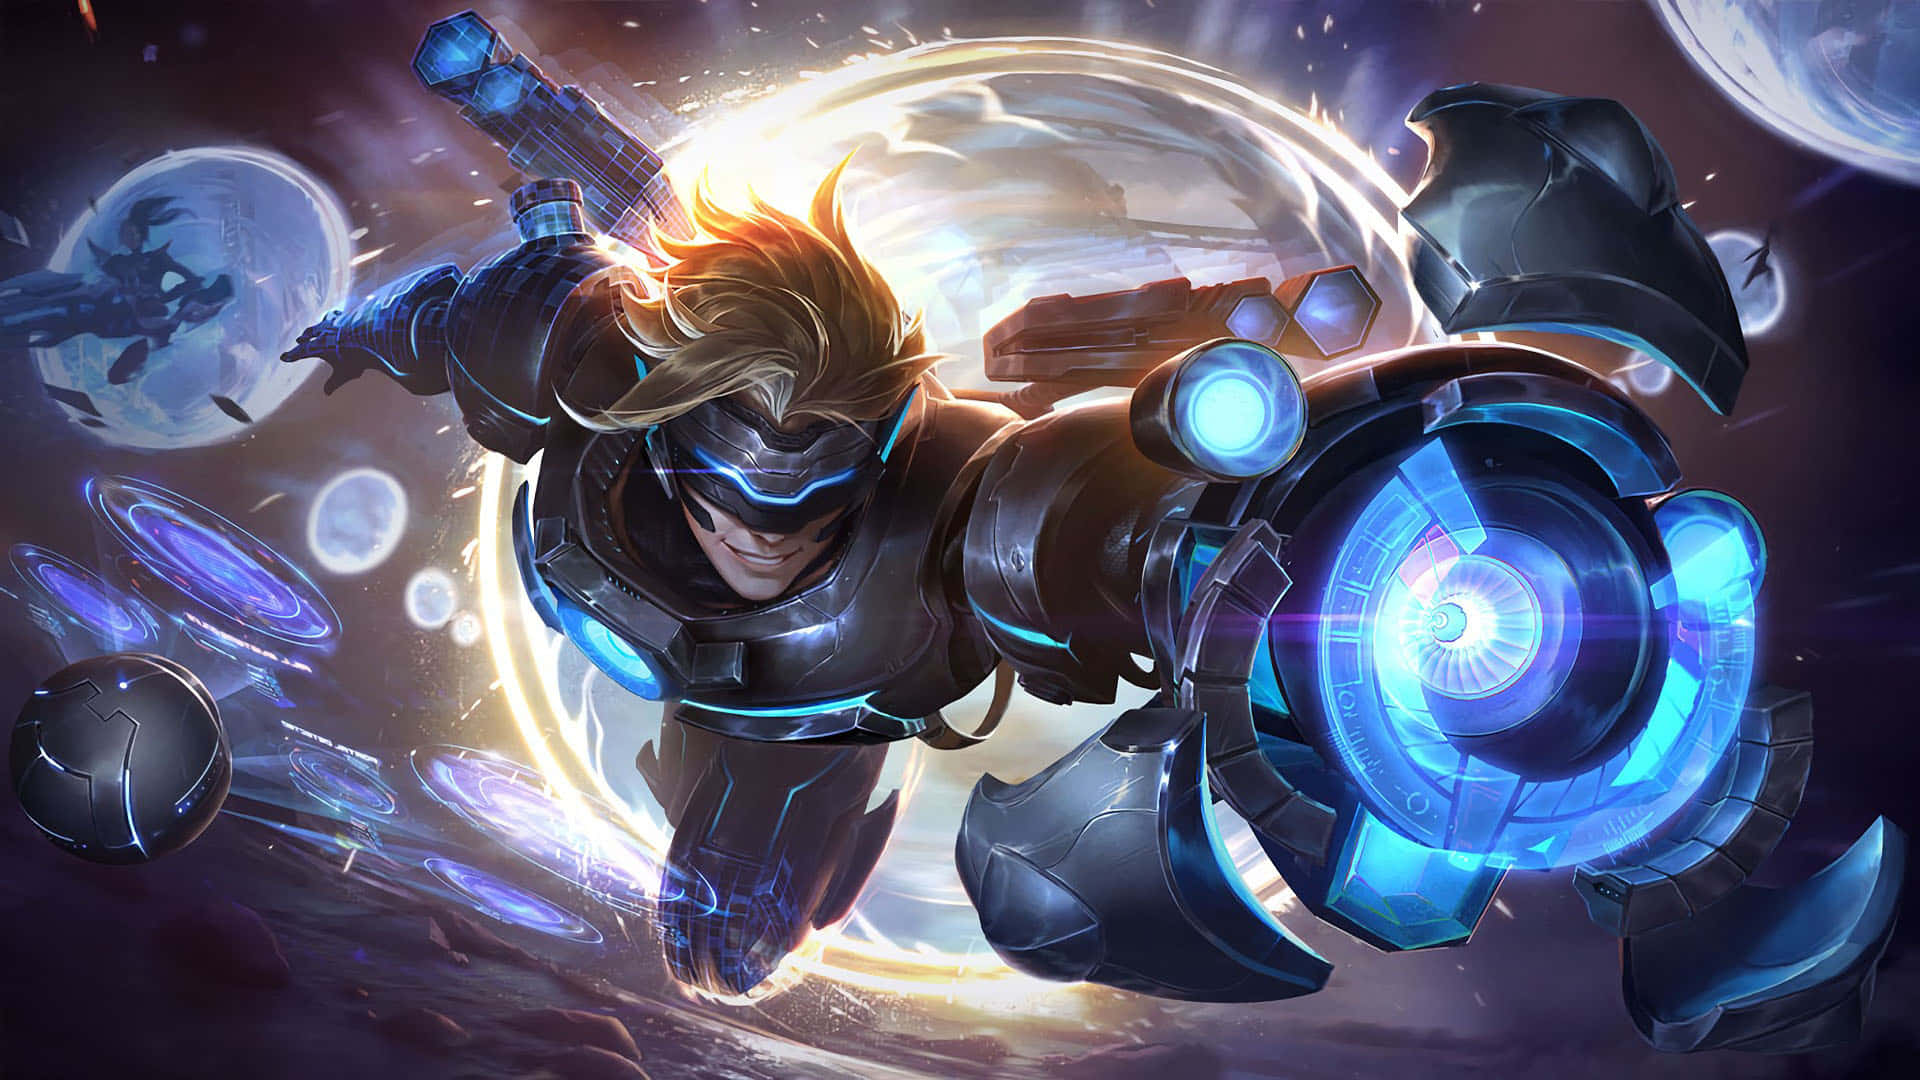 "Experience the magic of League of Legends in stunning HD" Wallpaper